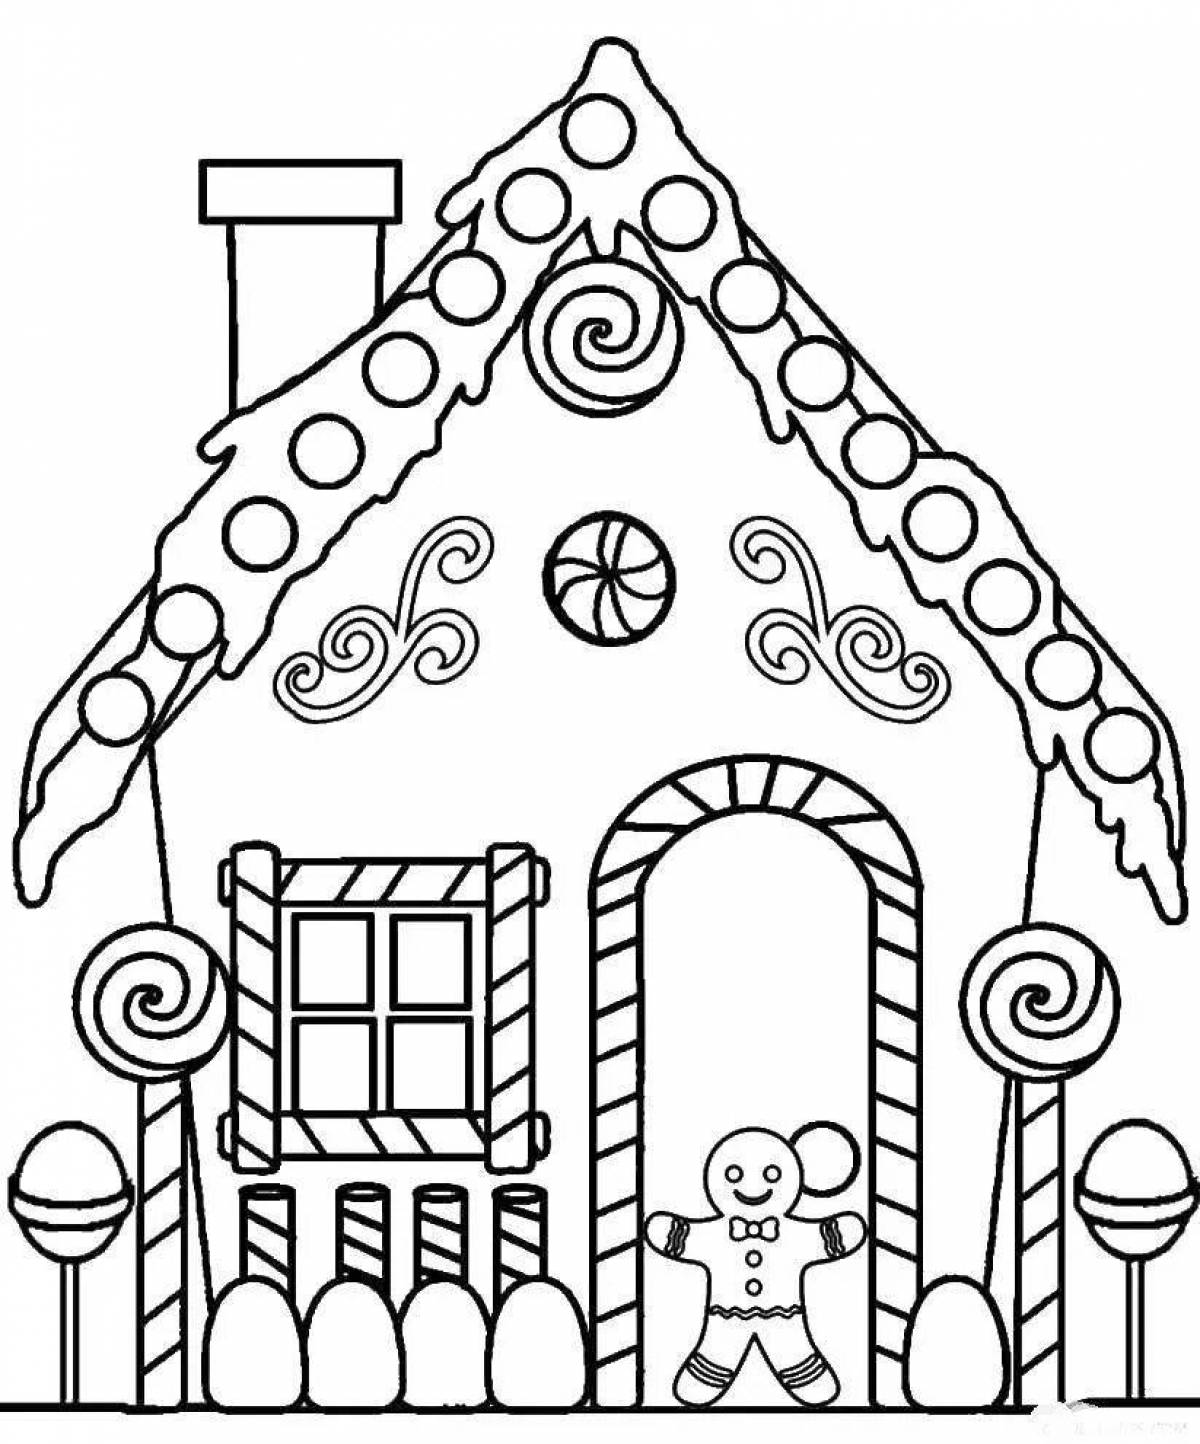 Color-frenzy children's world house coloring page